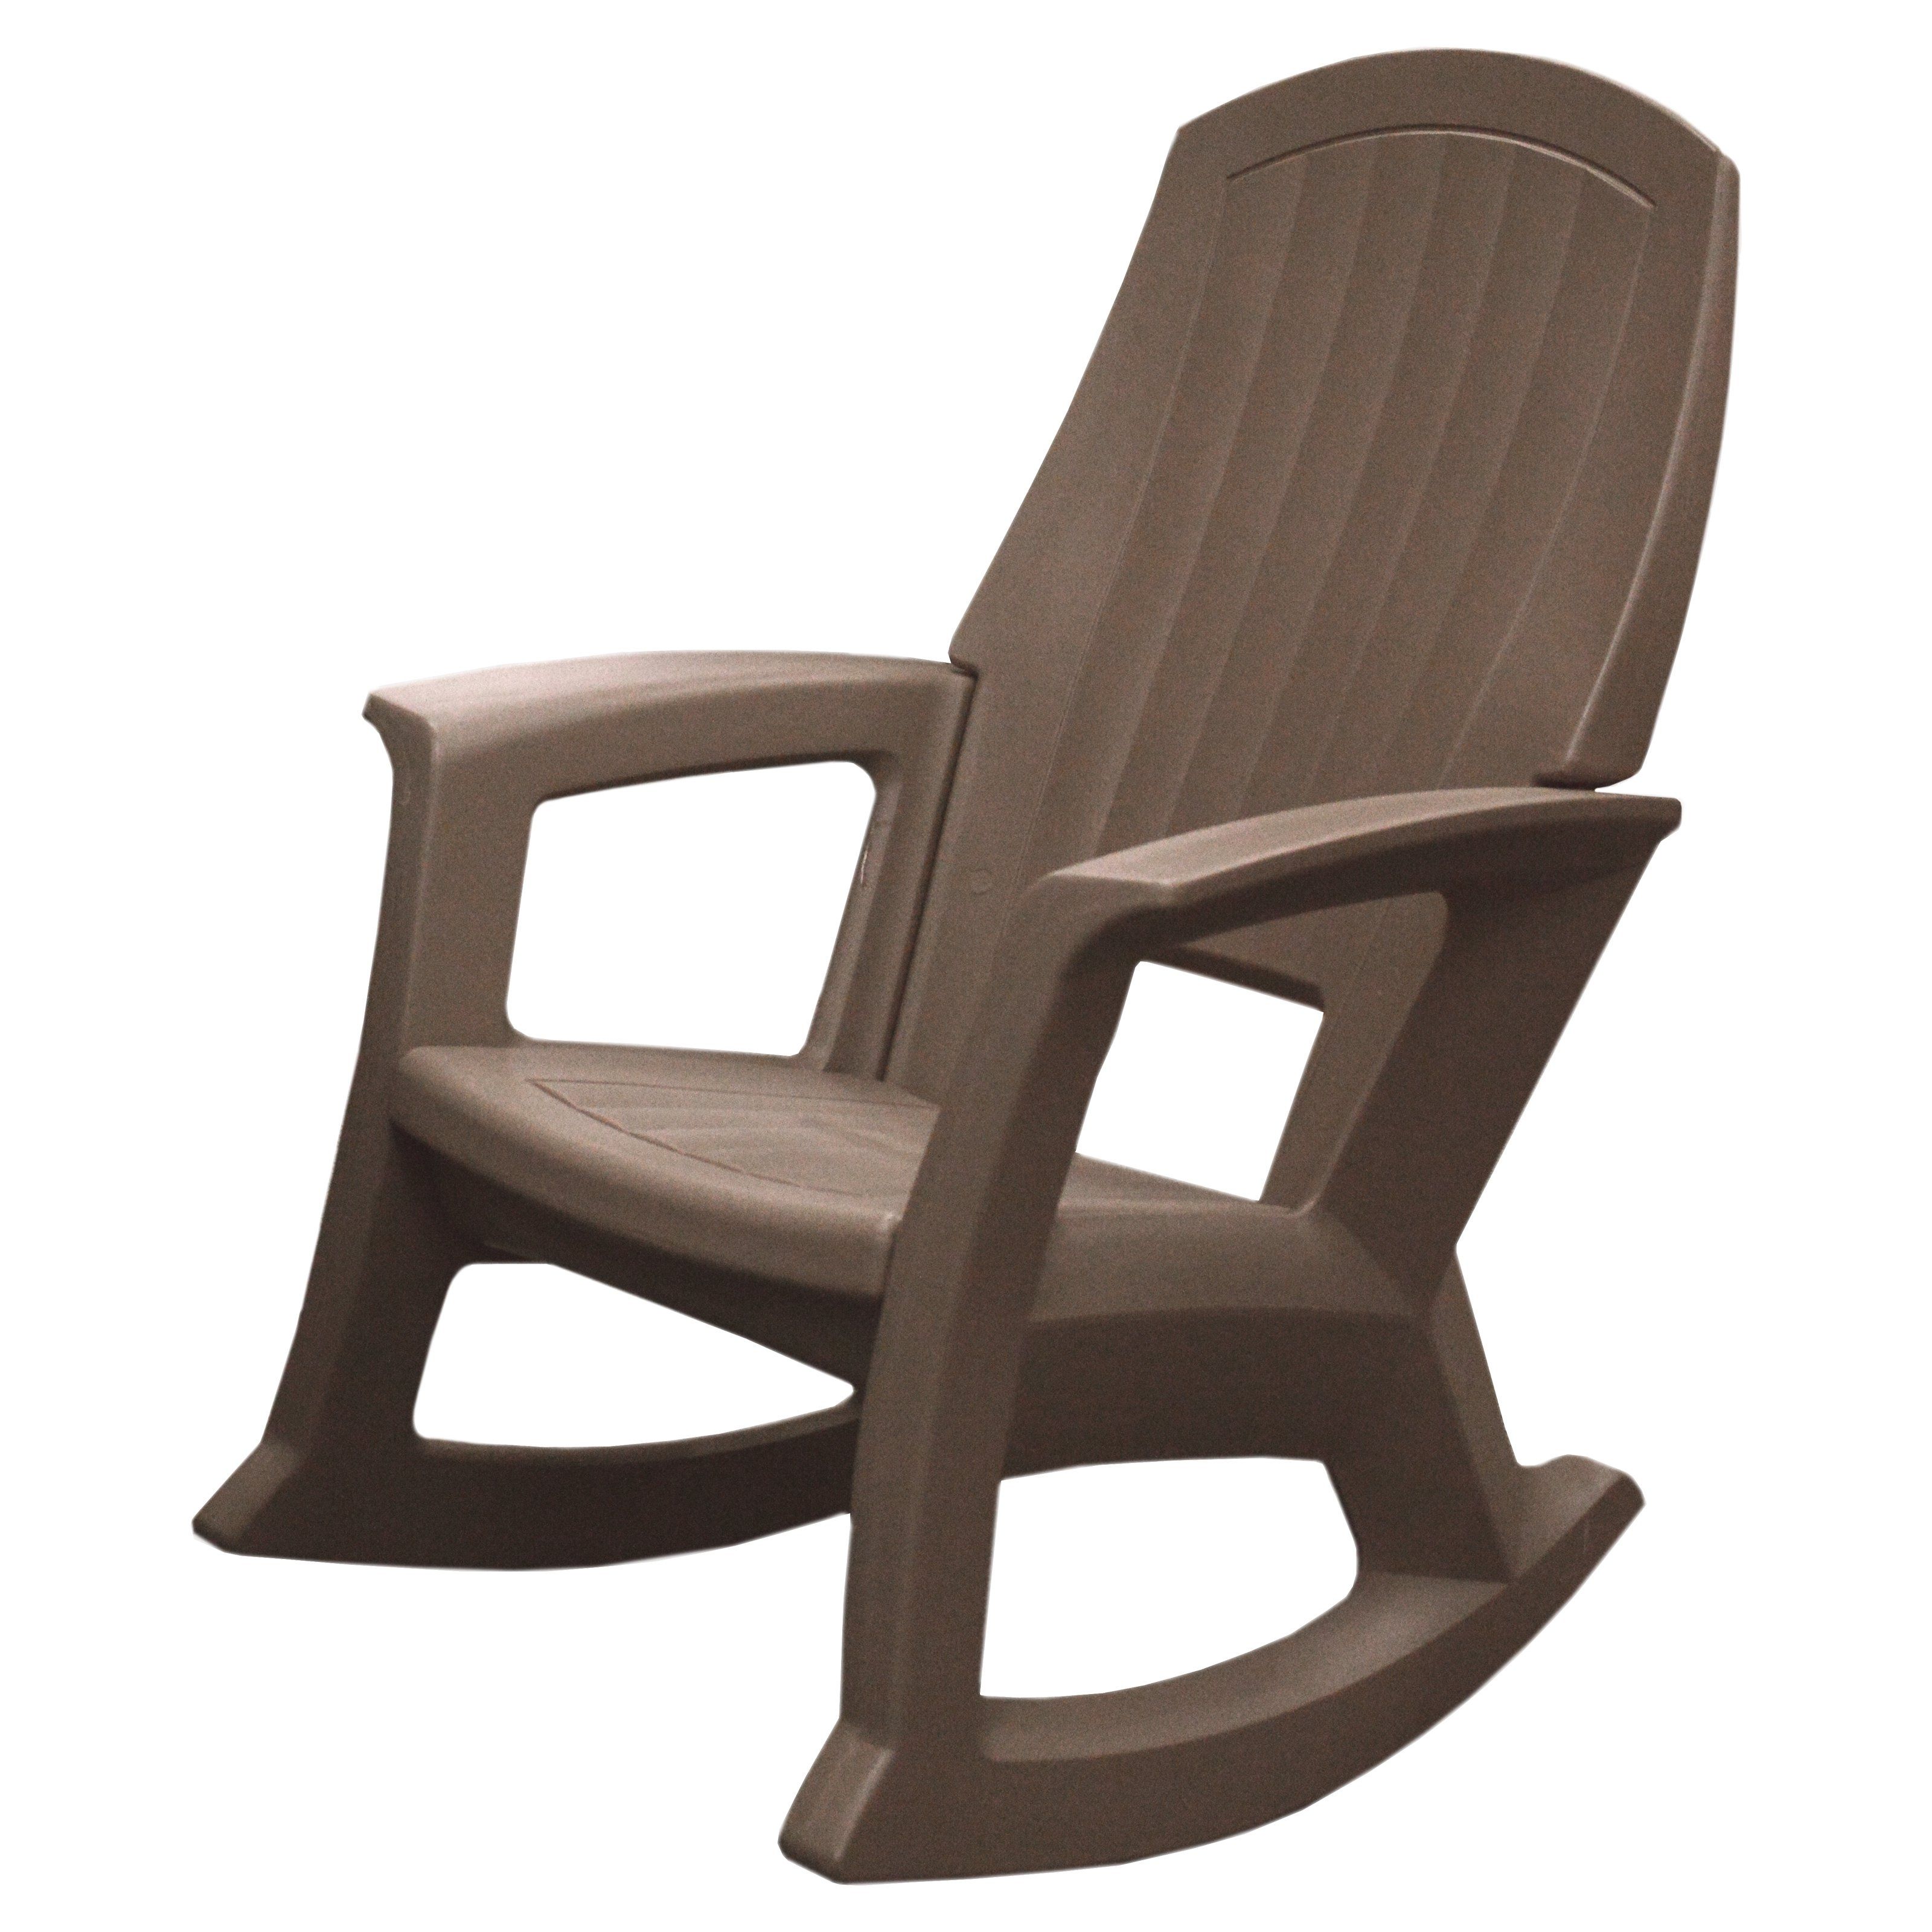 Semco Recycled Plastic Rocking Chair Options Taupe Ikea White Glider With Regard To Stackable Patio Rocking Chairs (View 11 of 15)